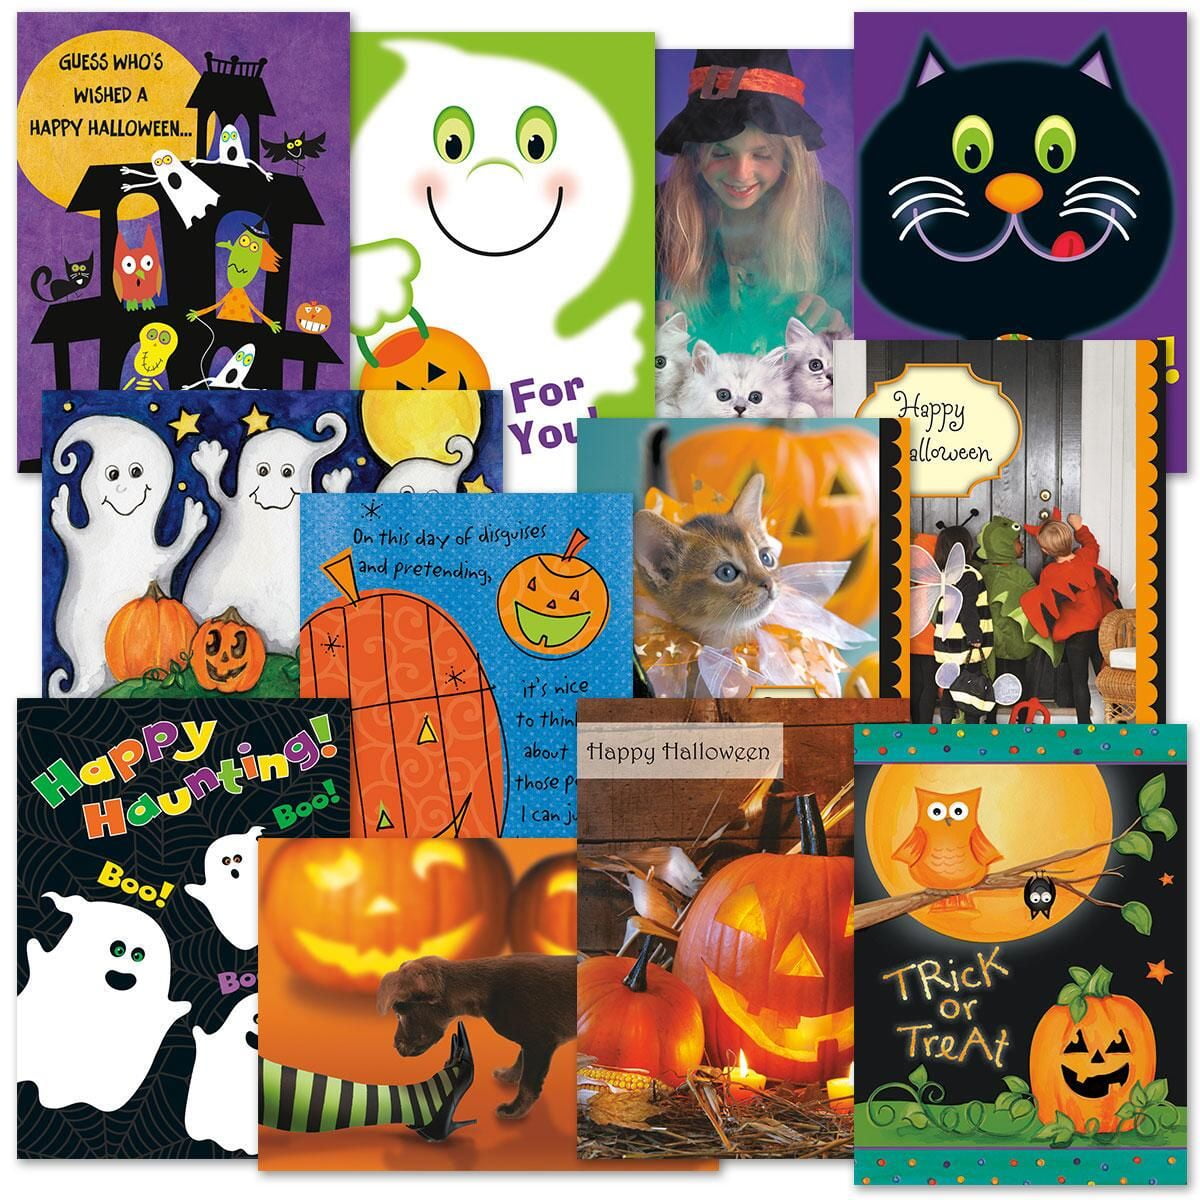 Details about   HALLOWEEN 3D POP-UP GREETING CARD CRESCENT MOON WITCH BY UP WITH PAPER 